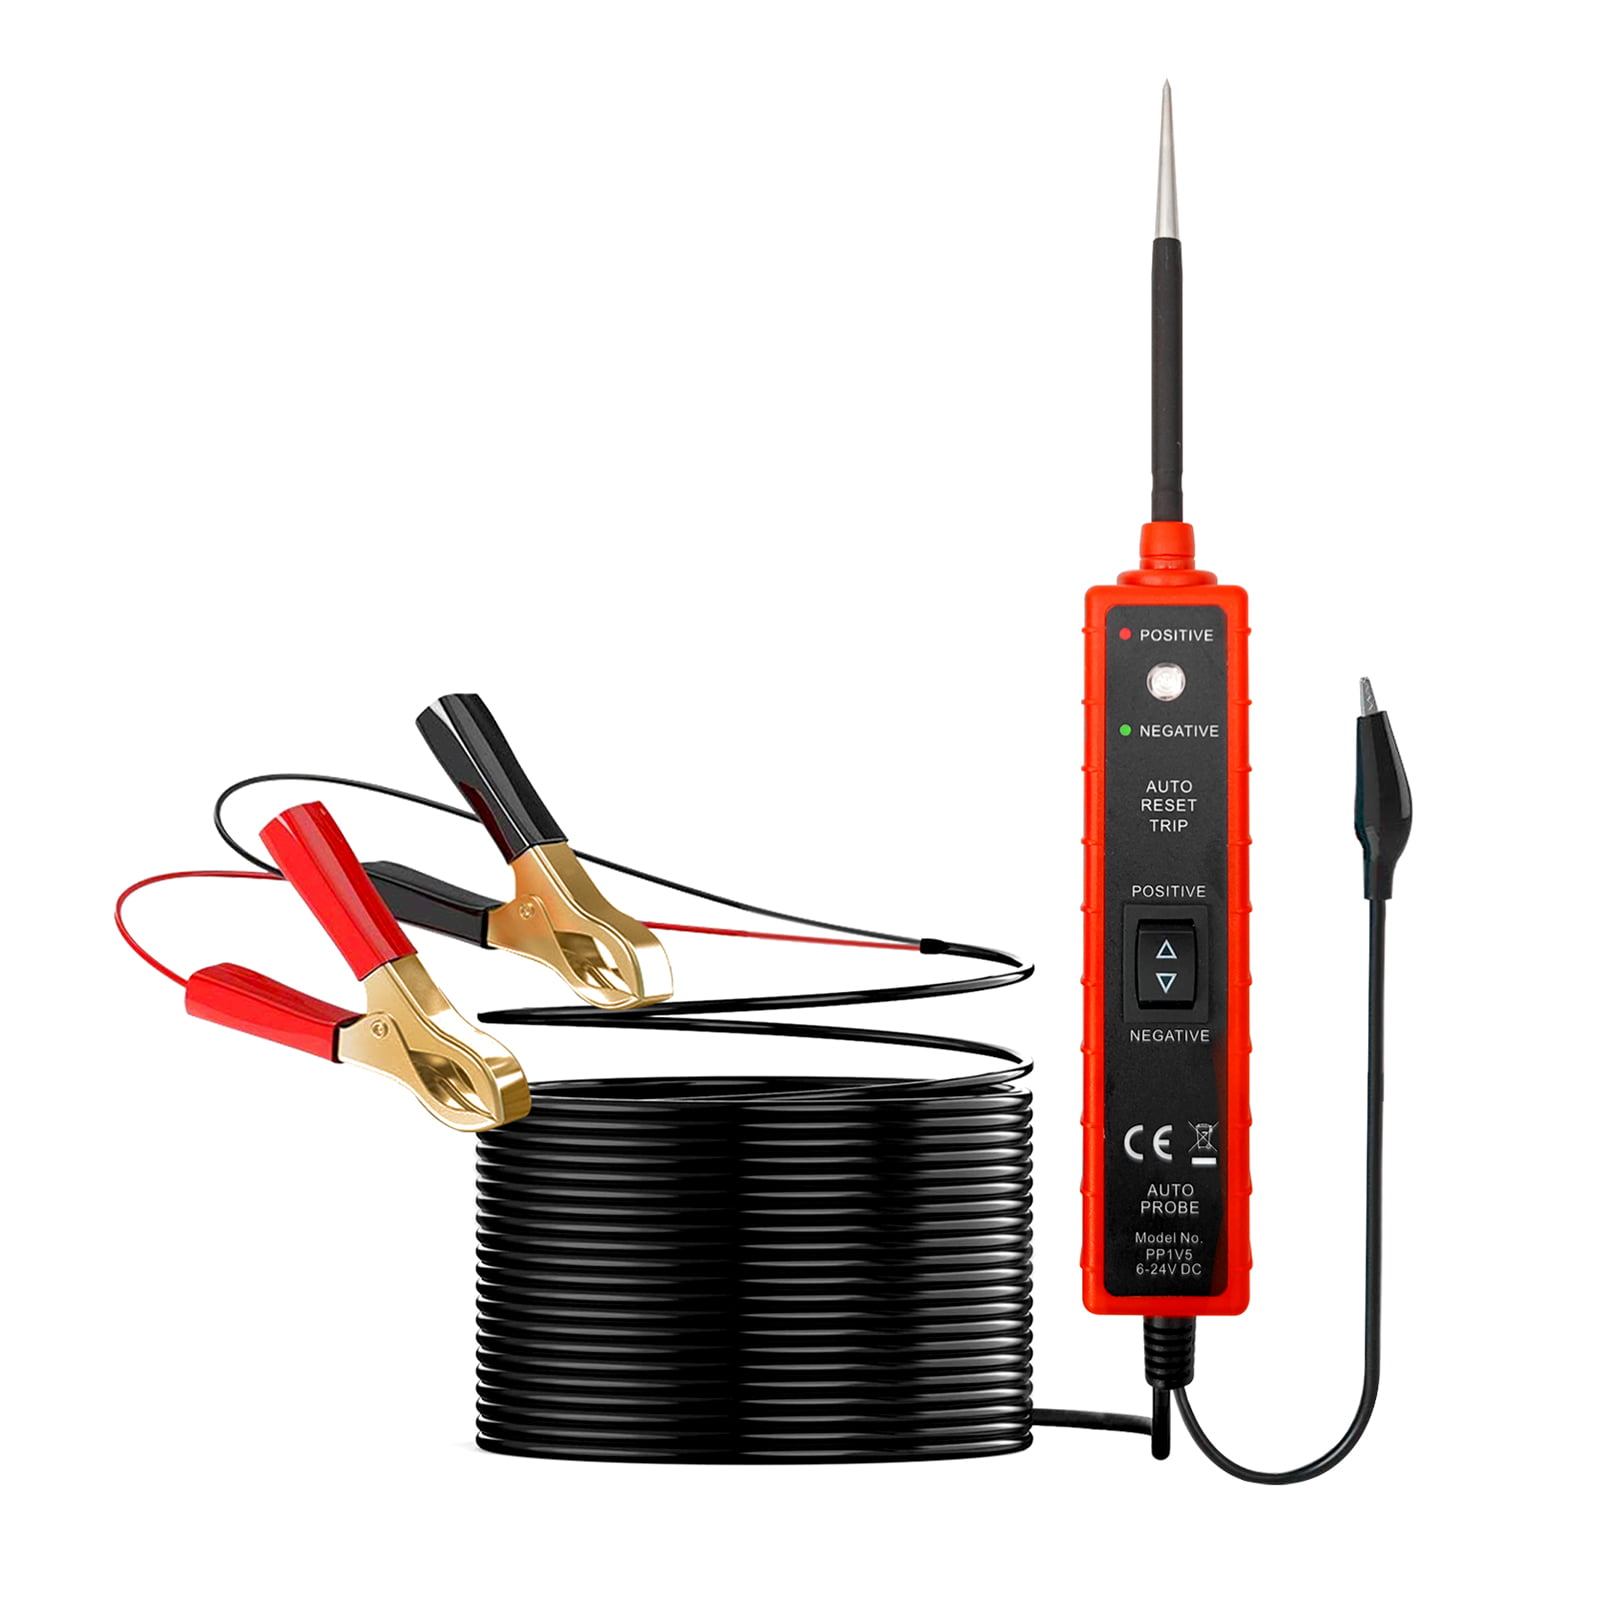 12v Test Light With Haptic Feedback Power Probe PWP-PPTACT1CS The Probe